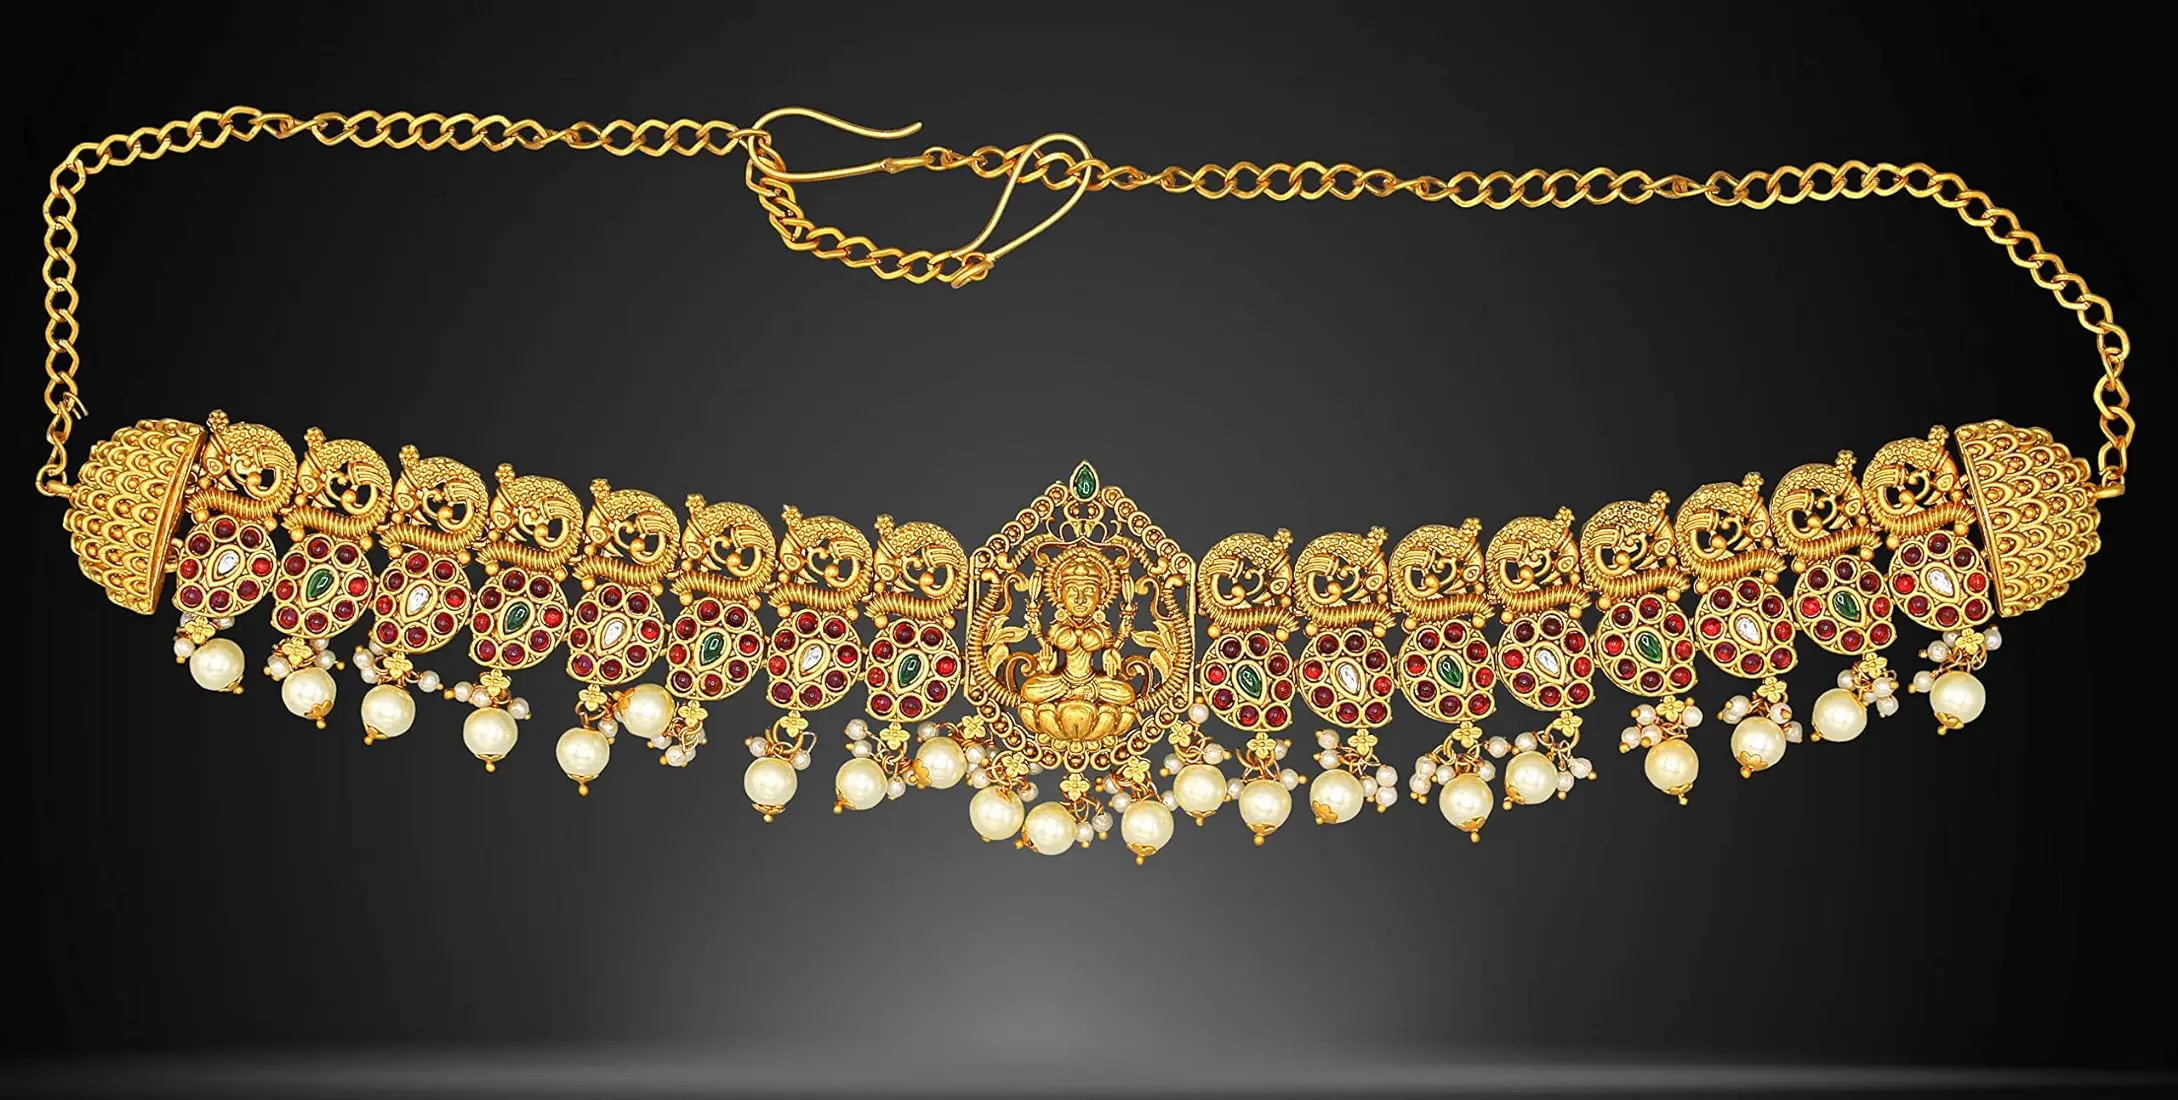 Temple Jewellery Divine Adornment Steeped in Tradition (6)  - Temple Jewellery Divine Adornment Steeped in Tradition 6 -